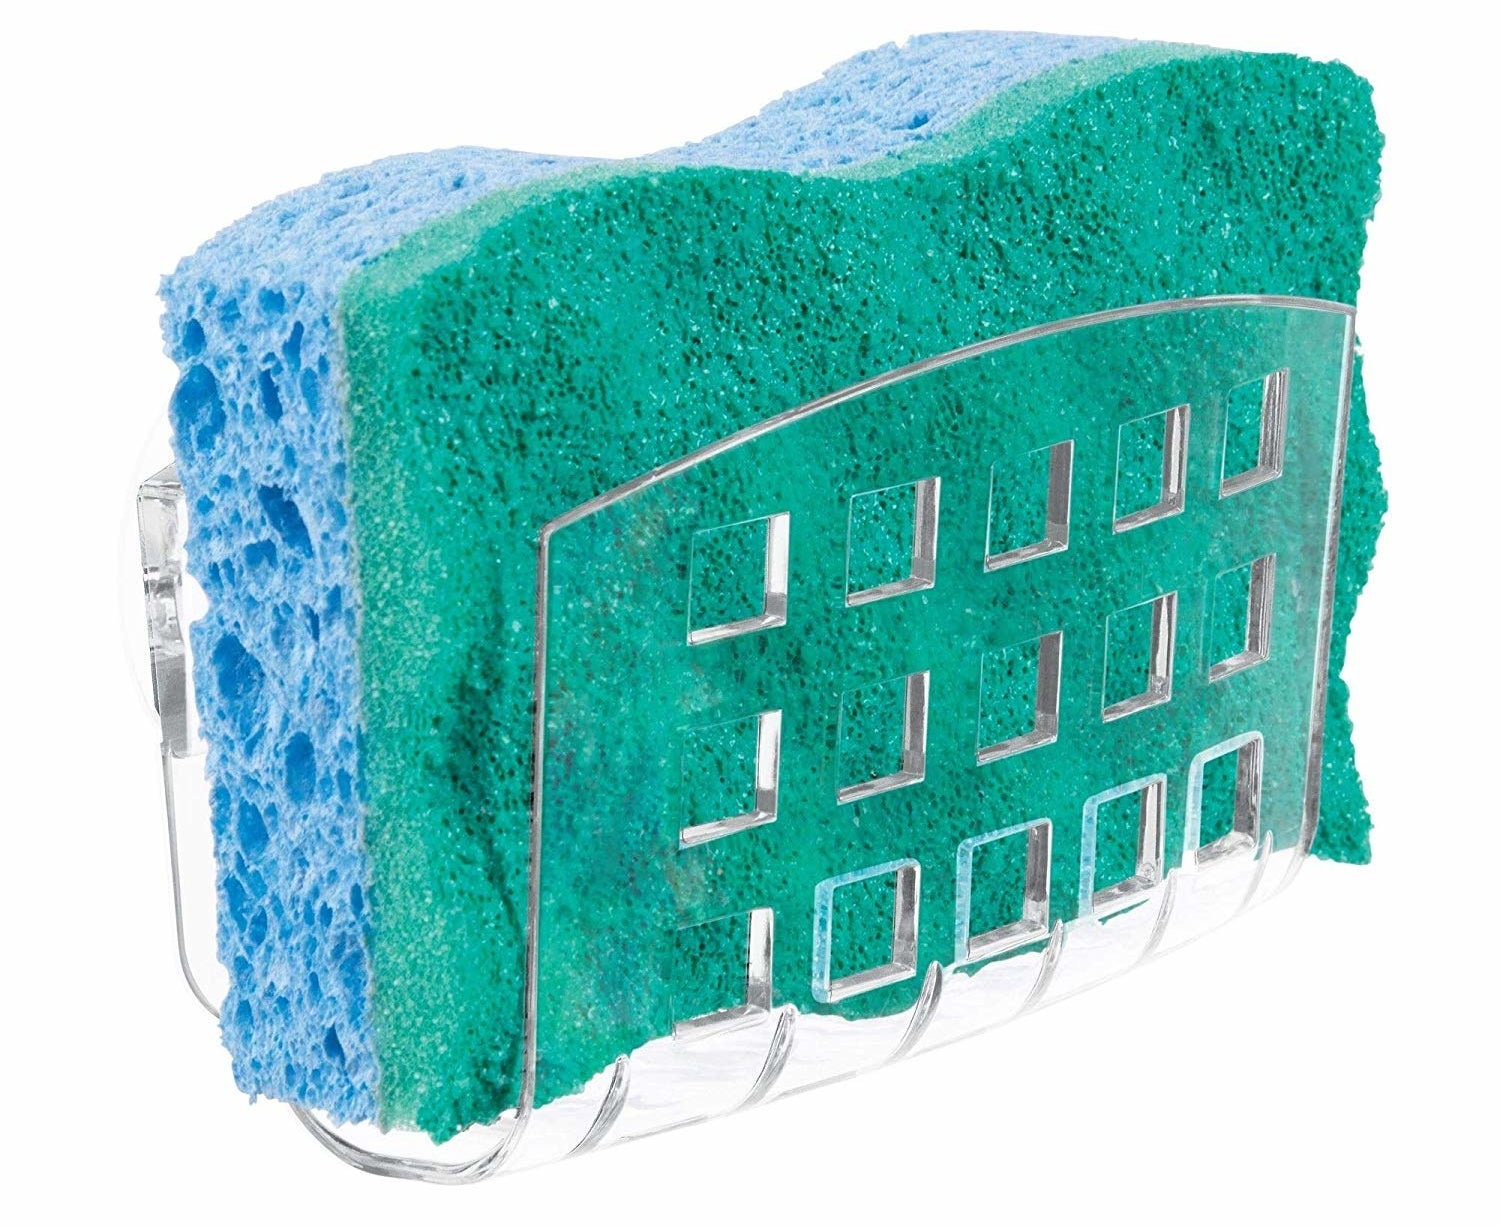 A sponge in the clear holder with square holes